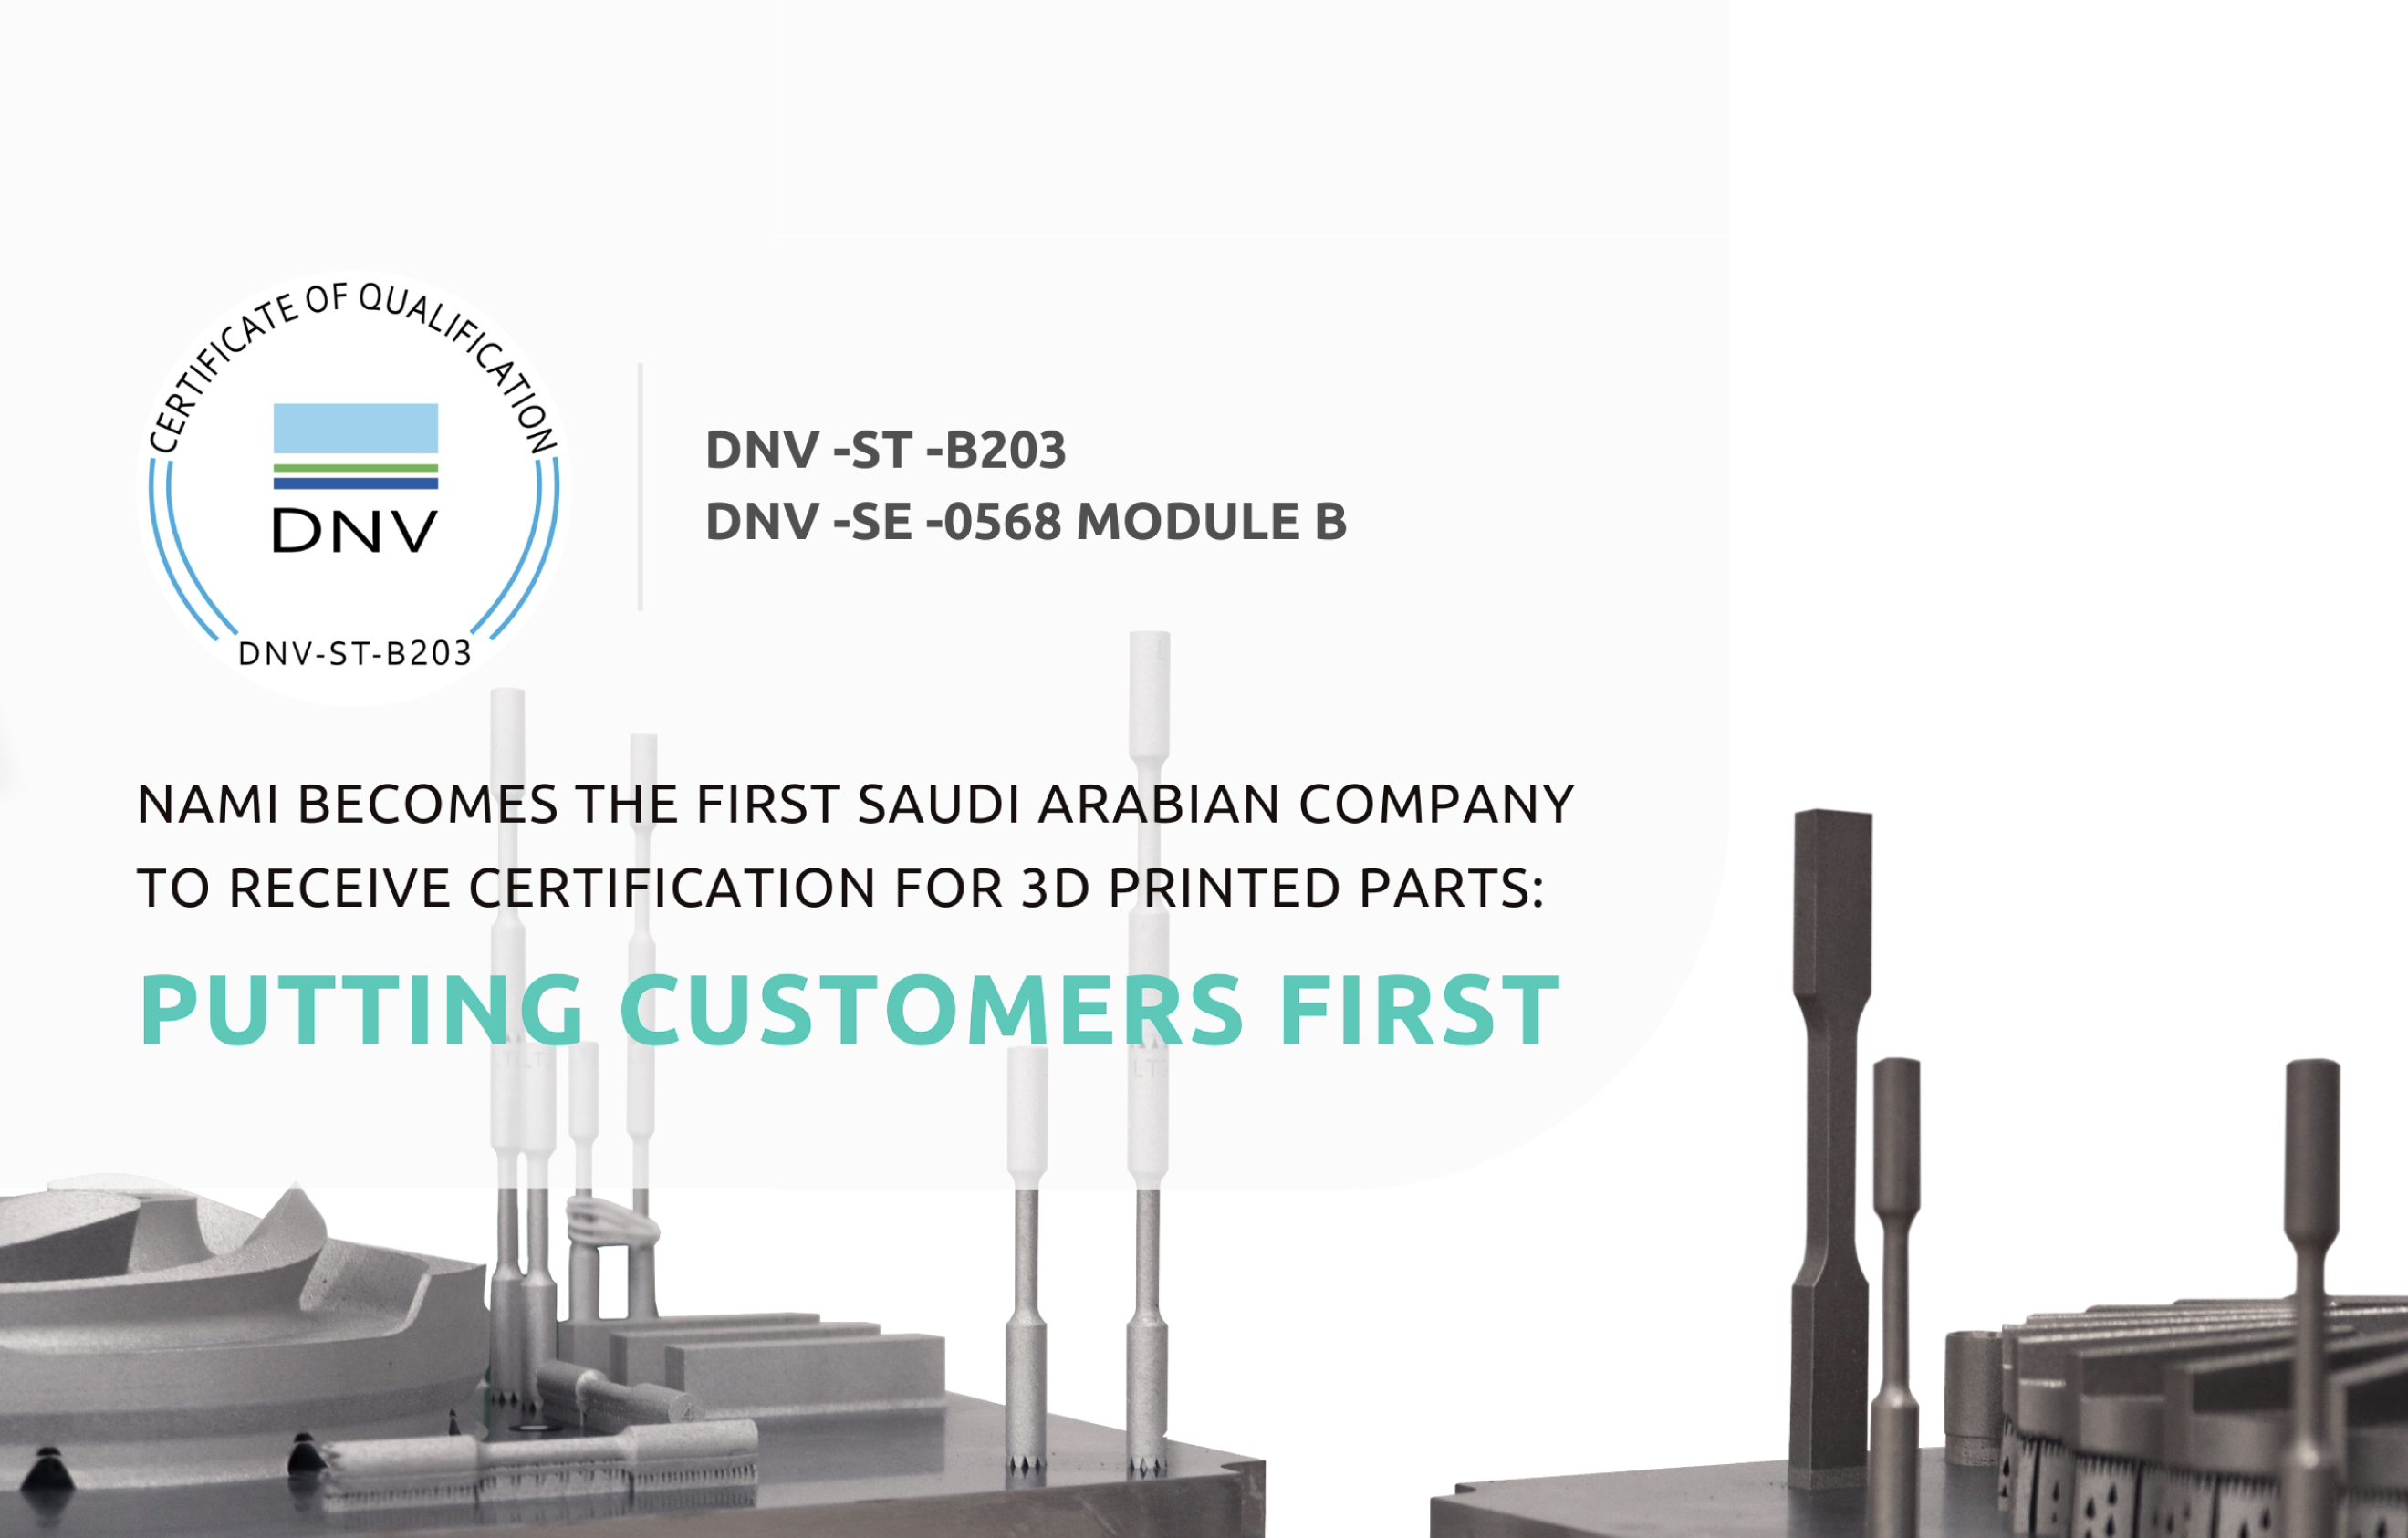 NAMI BECOMES THE FIRST SAUDI ARABIAN COMPANY TO RECEIVE CERTIFICATION FOR 3D PRINTED PARTS: PUTTING